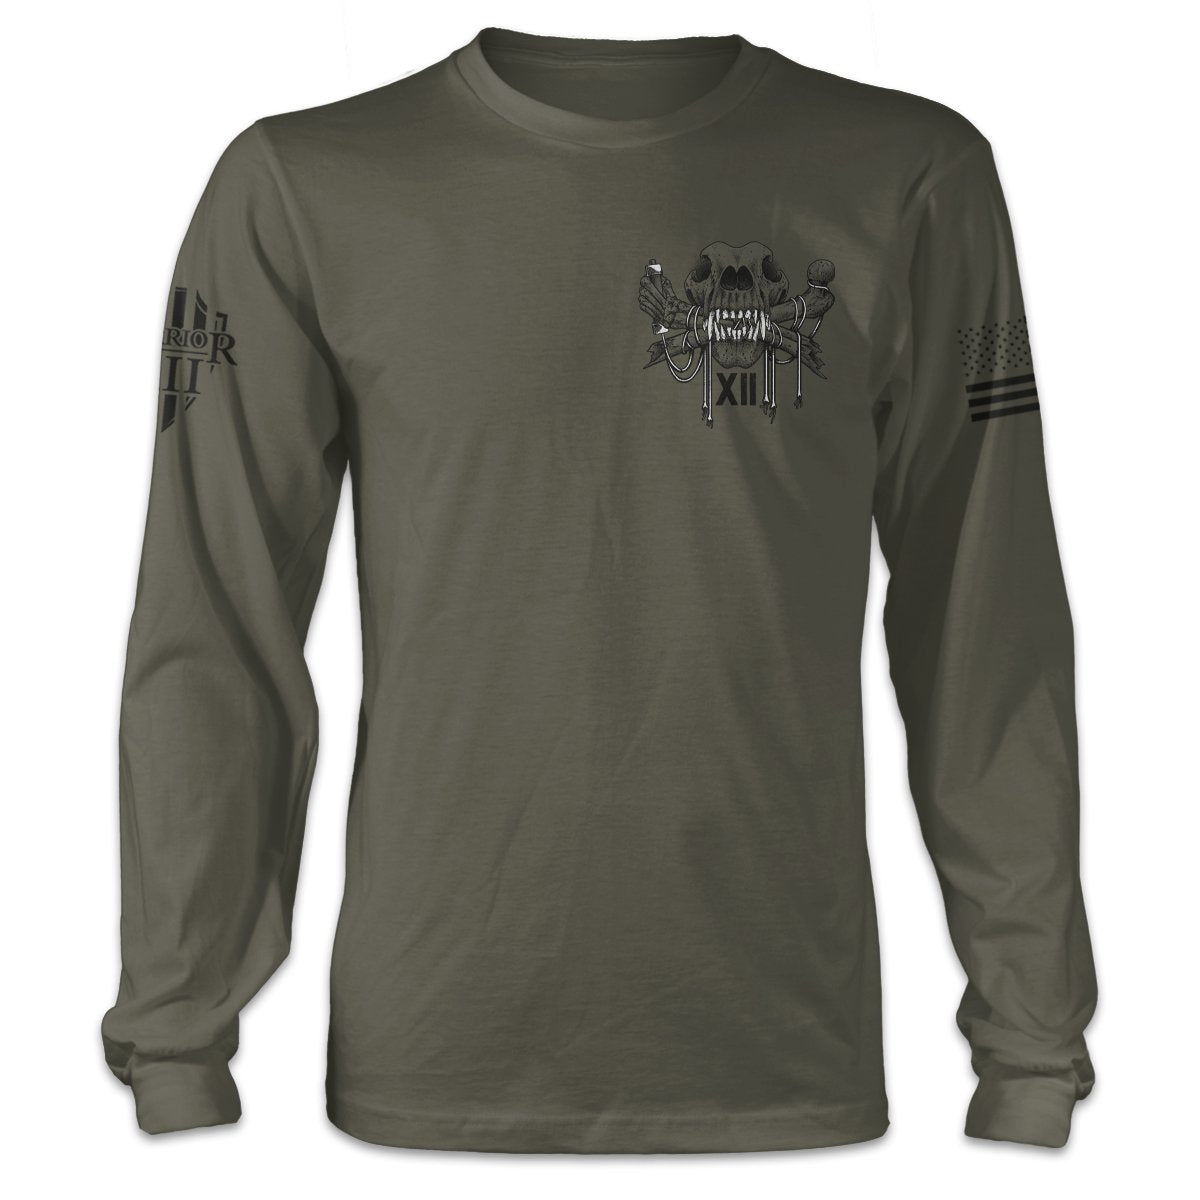 An olive green long sleeve shirt with a k9 skull printed on the front.